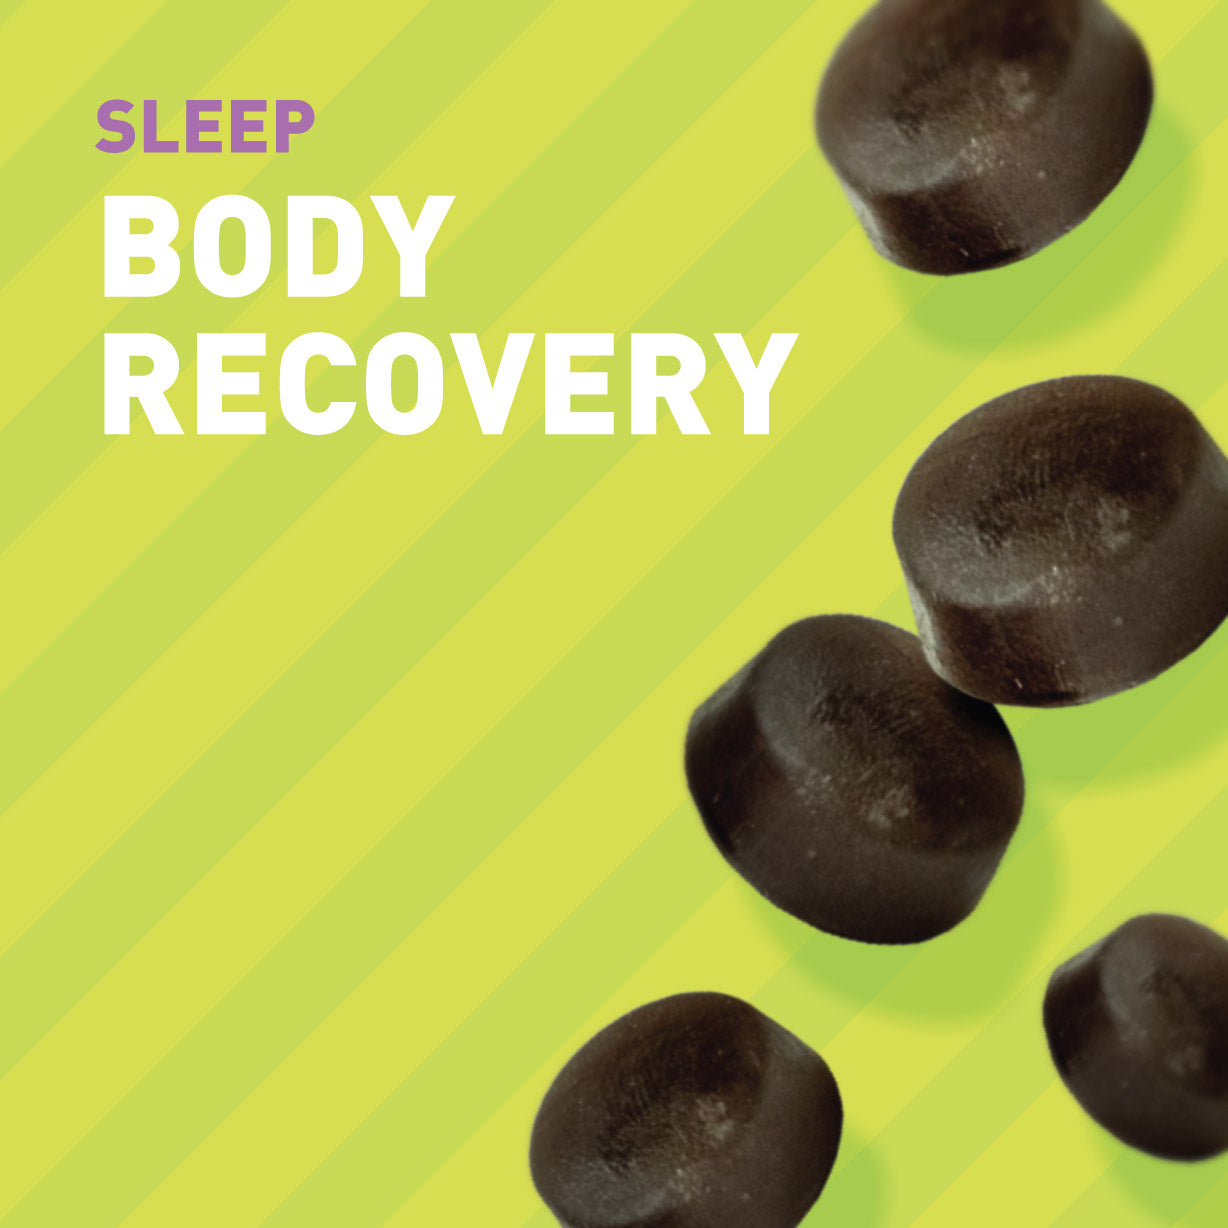 5 HTP can help regulate serotonin improving sleep mood and allowing for body recovery. With additional b vitamins, lemon balm, chamomile and zinc in delicious chewable gummy